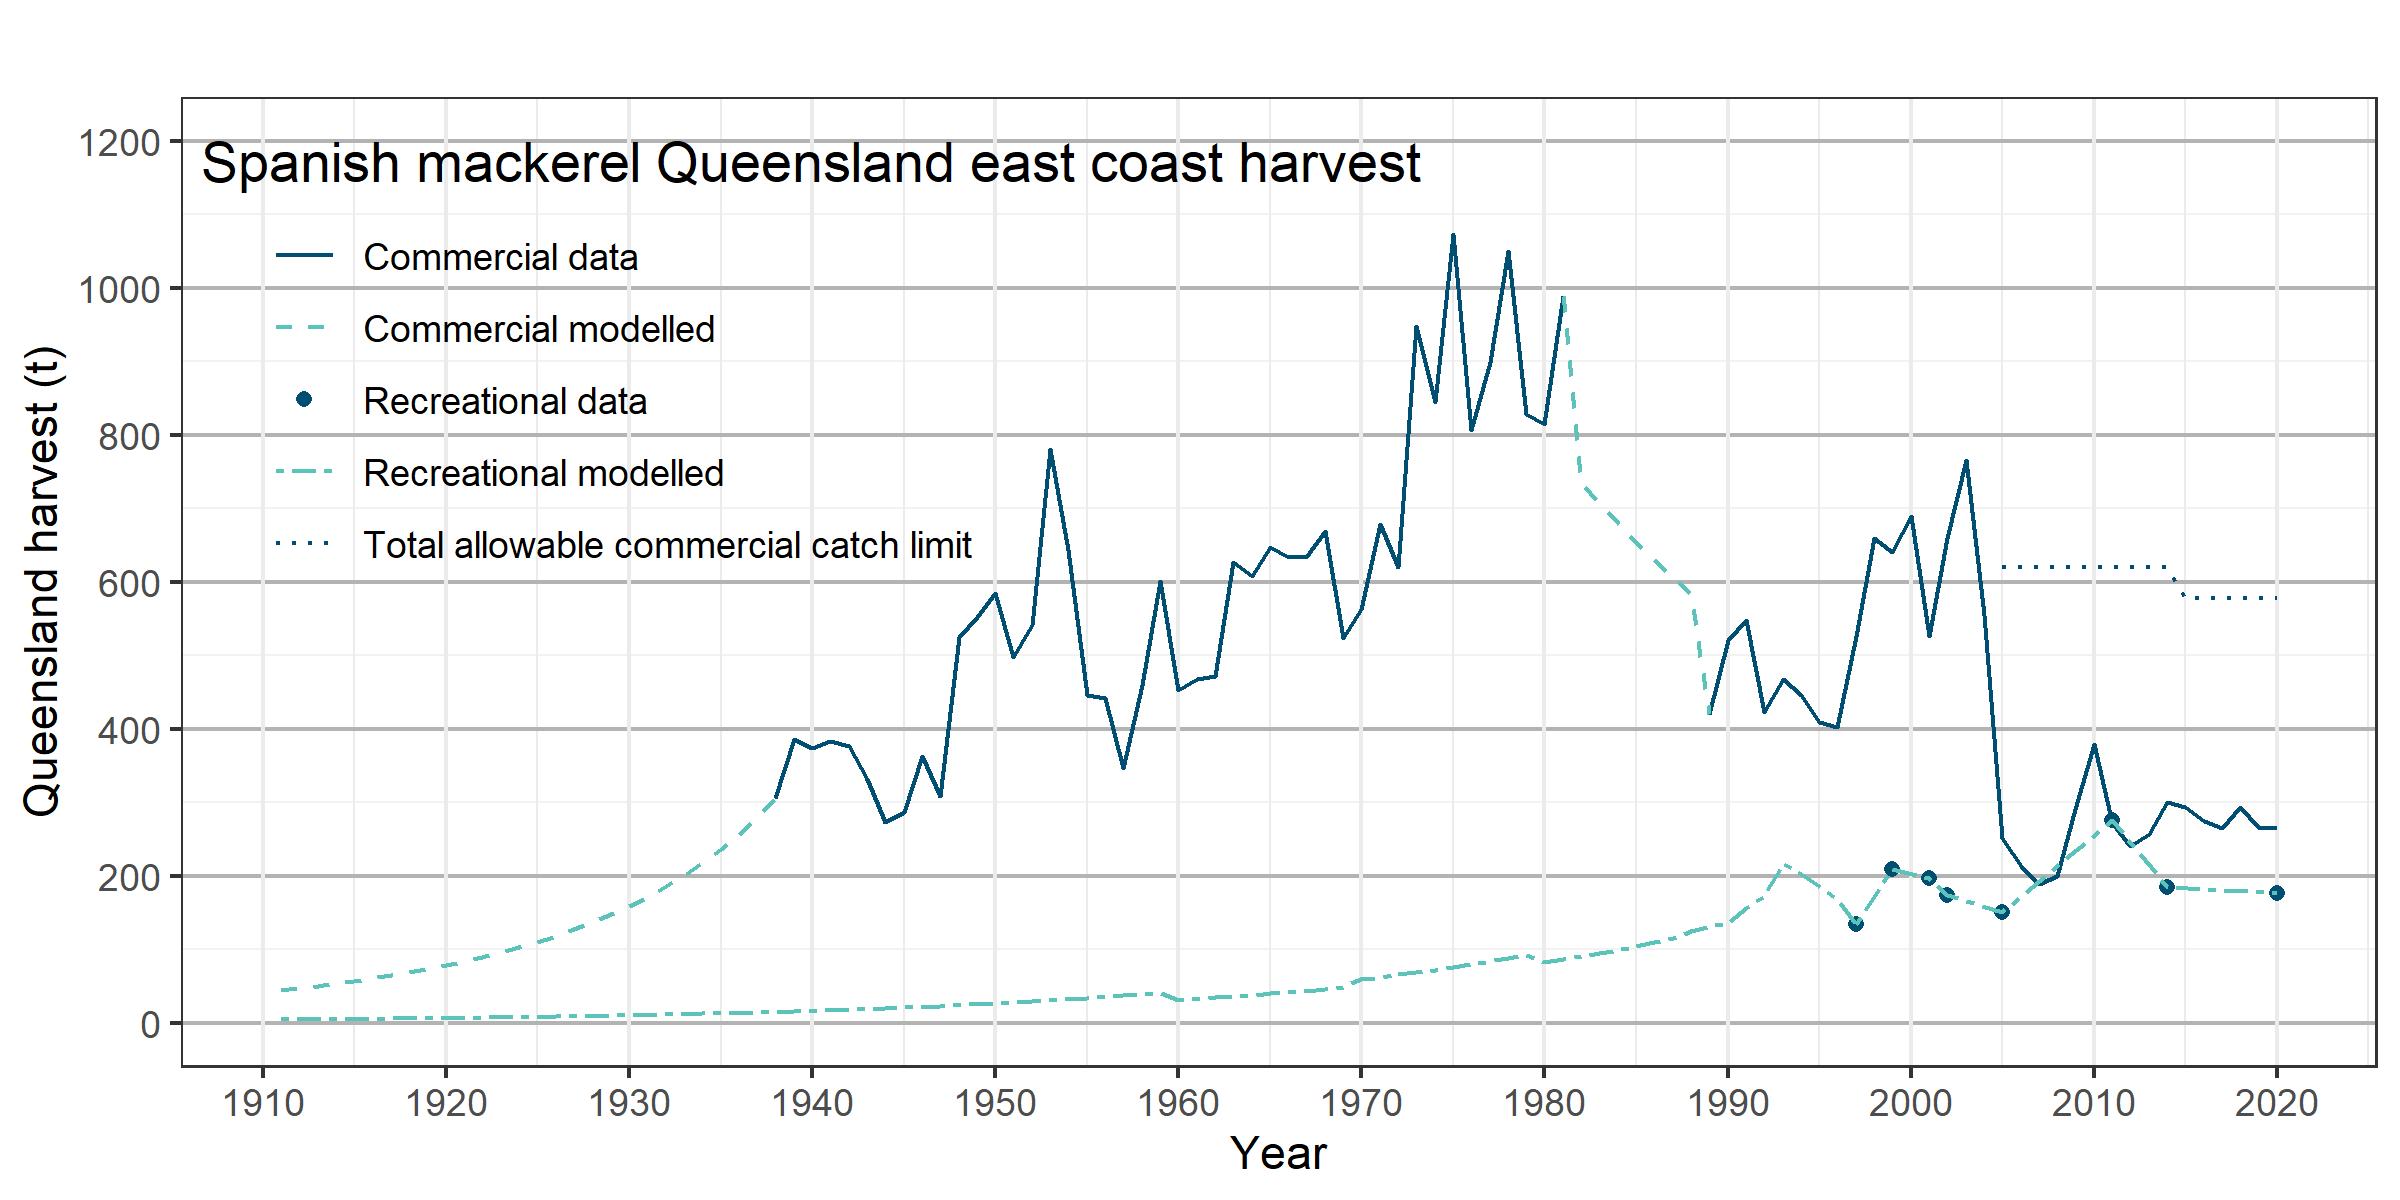 The chart presents the Spanish mackerel harvest taken by commercial and recreational fishers on Queensland’s east coast from 1911 to 2020. The commercial harvest is modelled between 1911 and 1937 and again from 1981 to 1989. The recreational harvest is modelled from 1911 to 2020 apart from 1997, 1999, 2001, 2002, 2005, 2011, 2014 and 2020 where survey data is available. The total allowable commercial catch is given from 2005 to 2020.